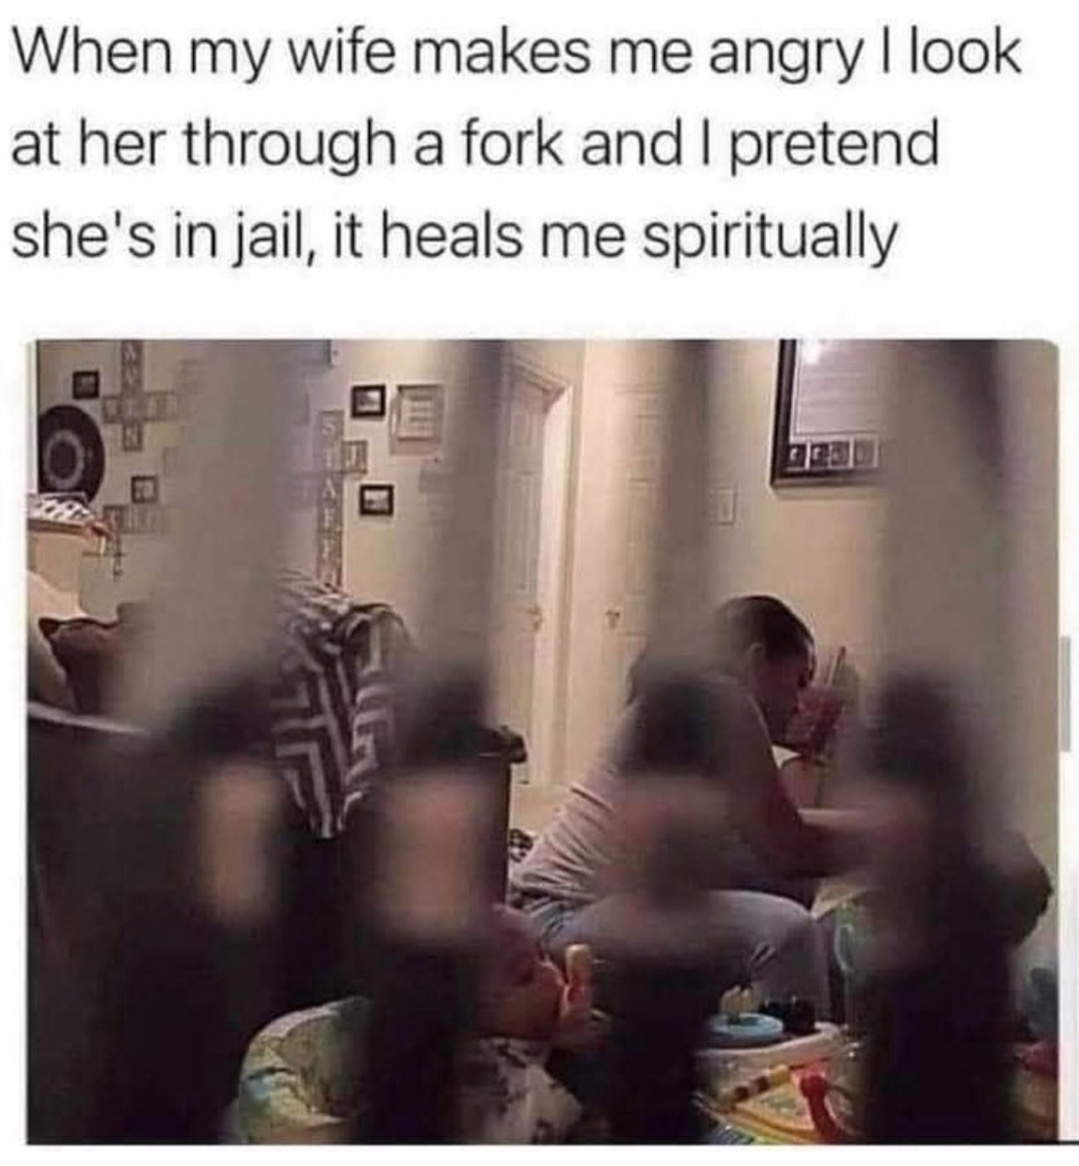 When my wife makes me angry I look at her through a fork and I pretend she's in jail, it heals me spiritually